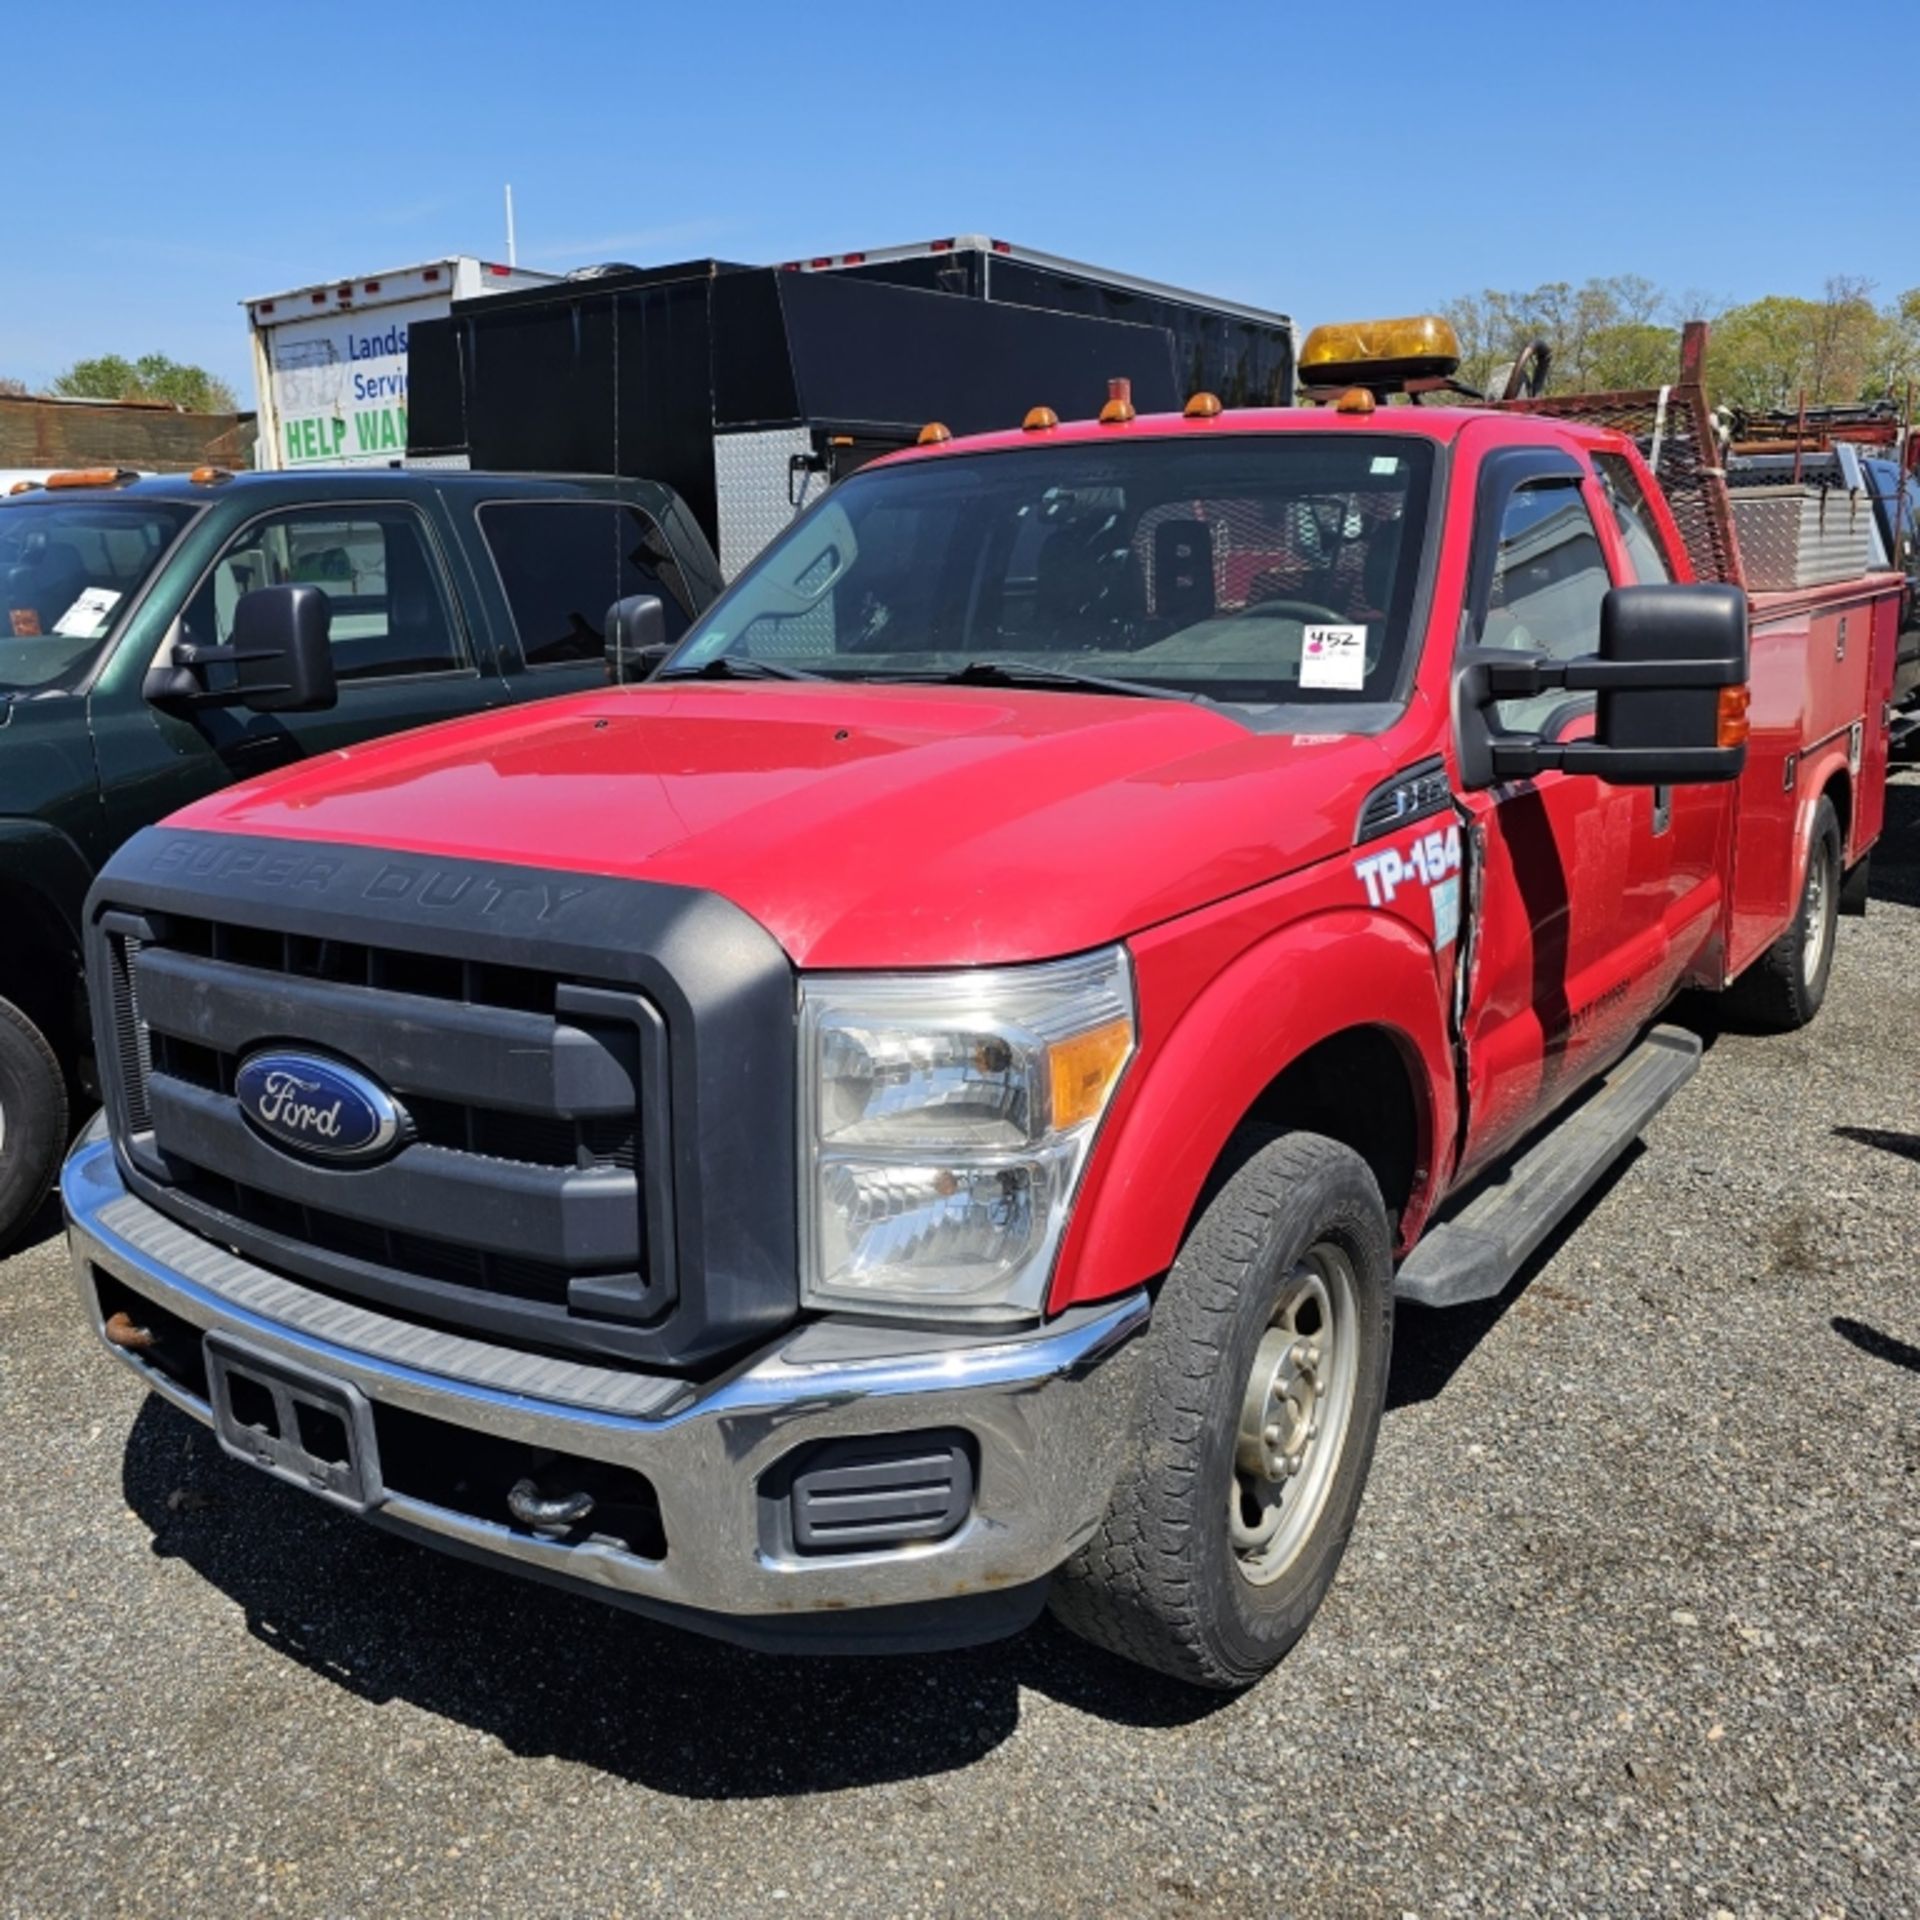 2013 Ford F350 Pickup - Image 2 of 9